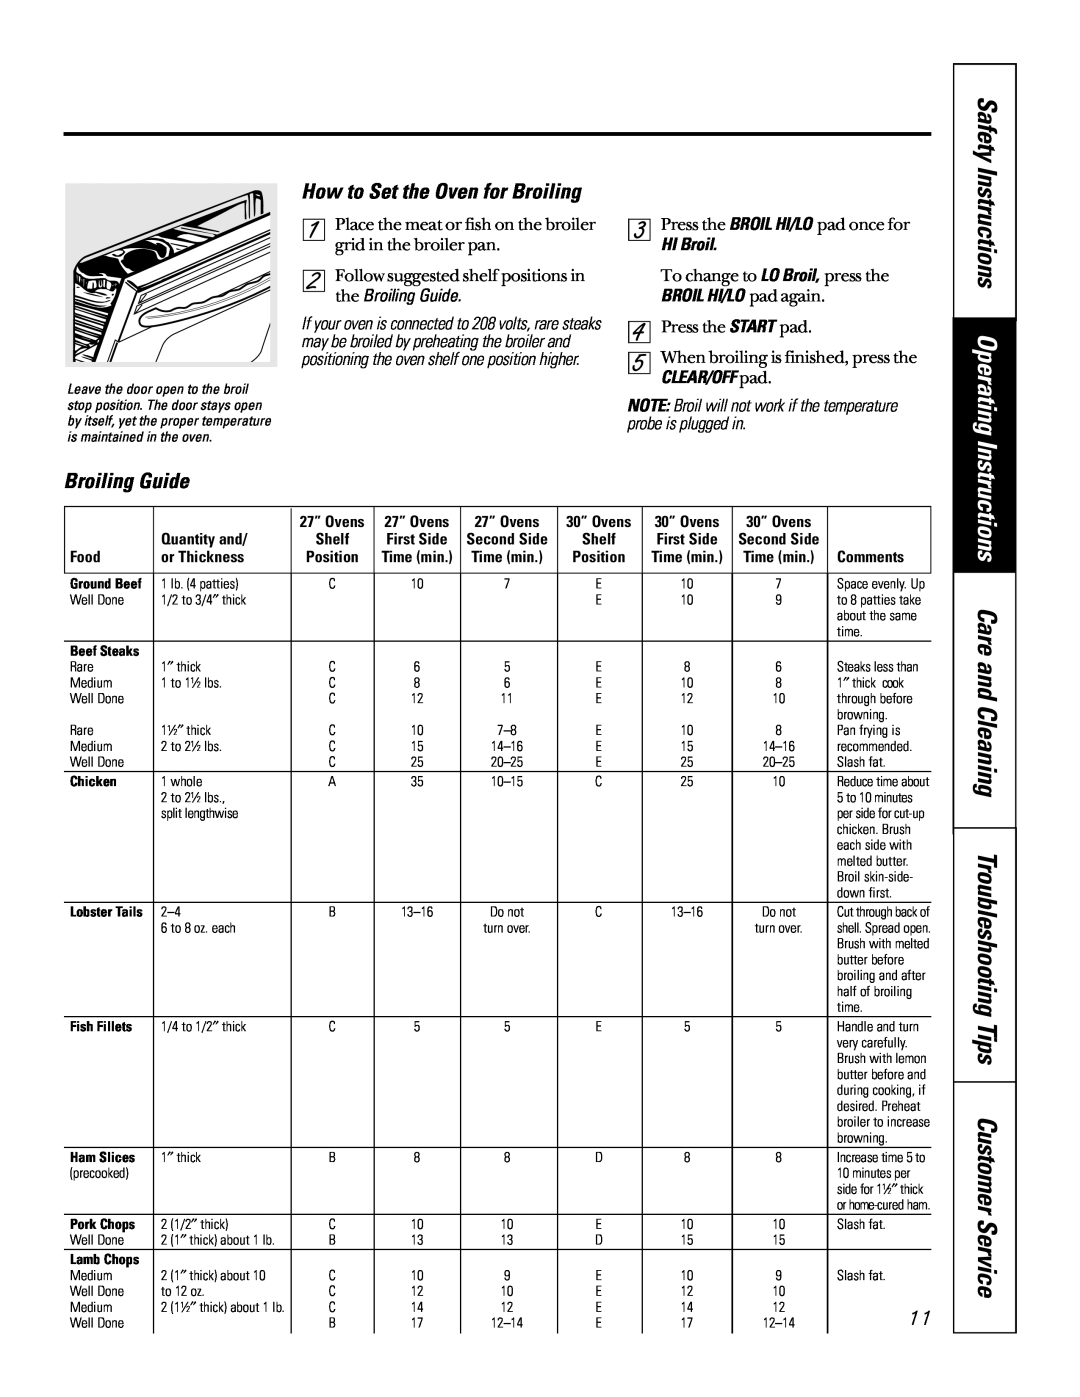 GE jt910 Safety Instructions Operating, How to Set the Oven for Broiling, Broiling Guide, 27” Ovens, 30” Ovens, Food 